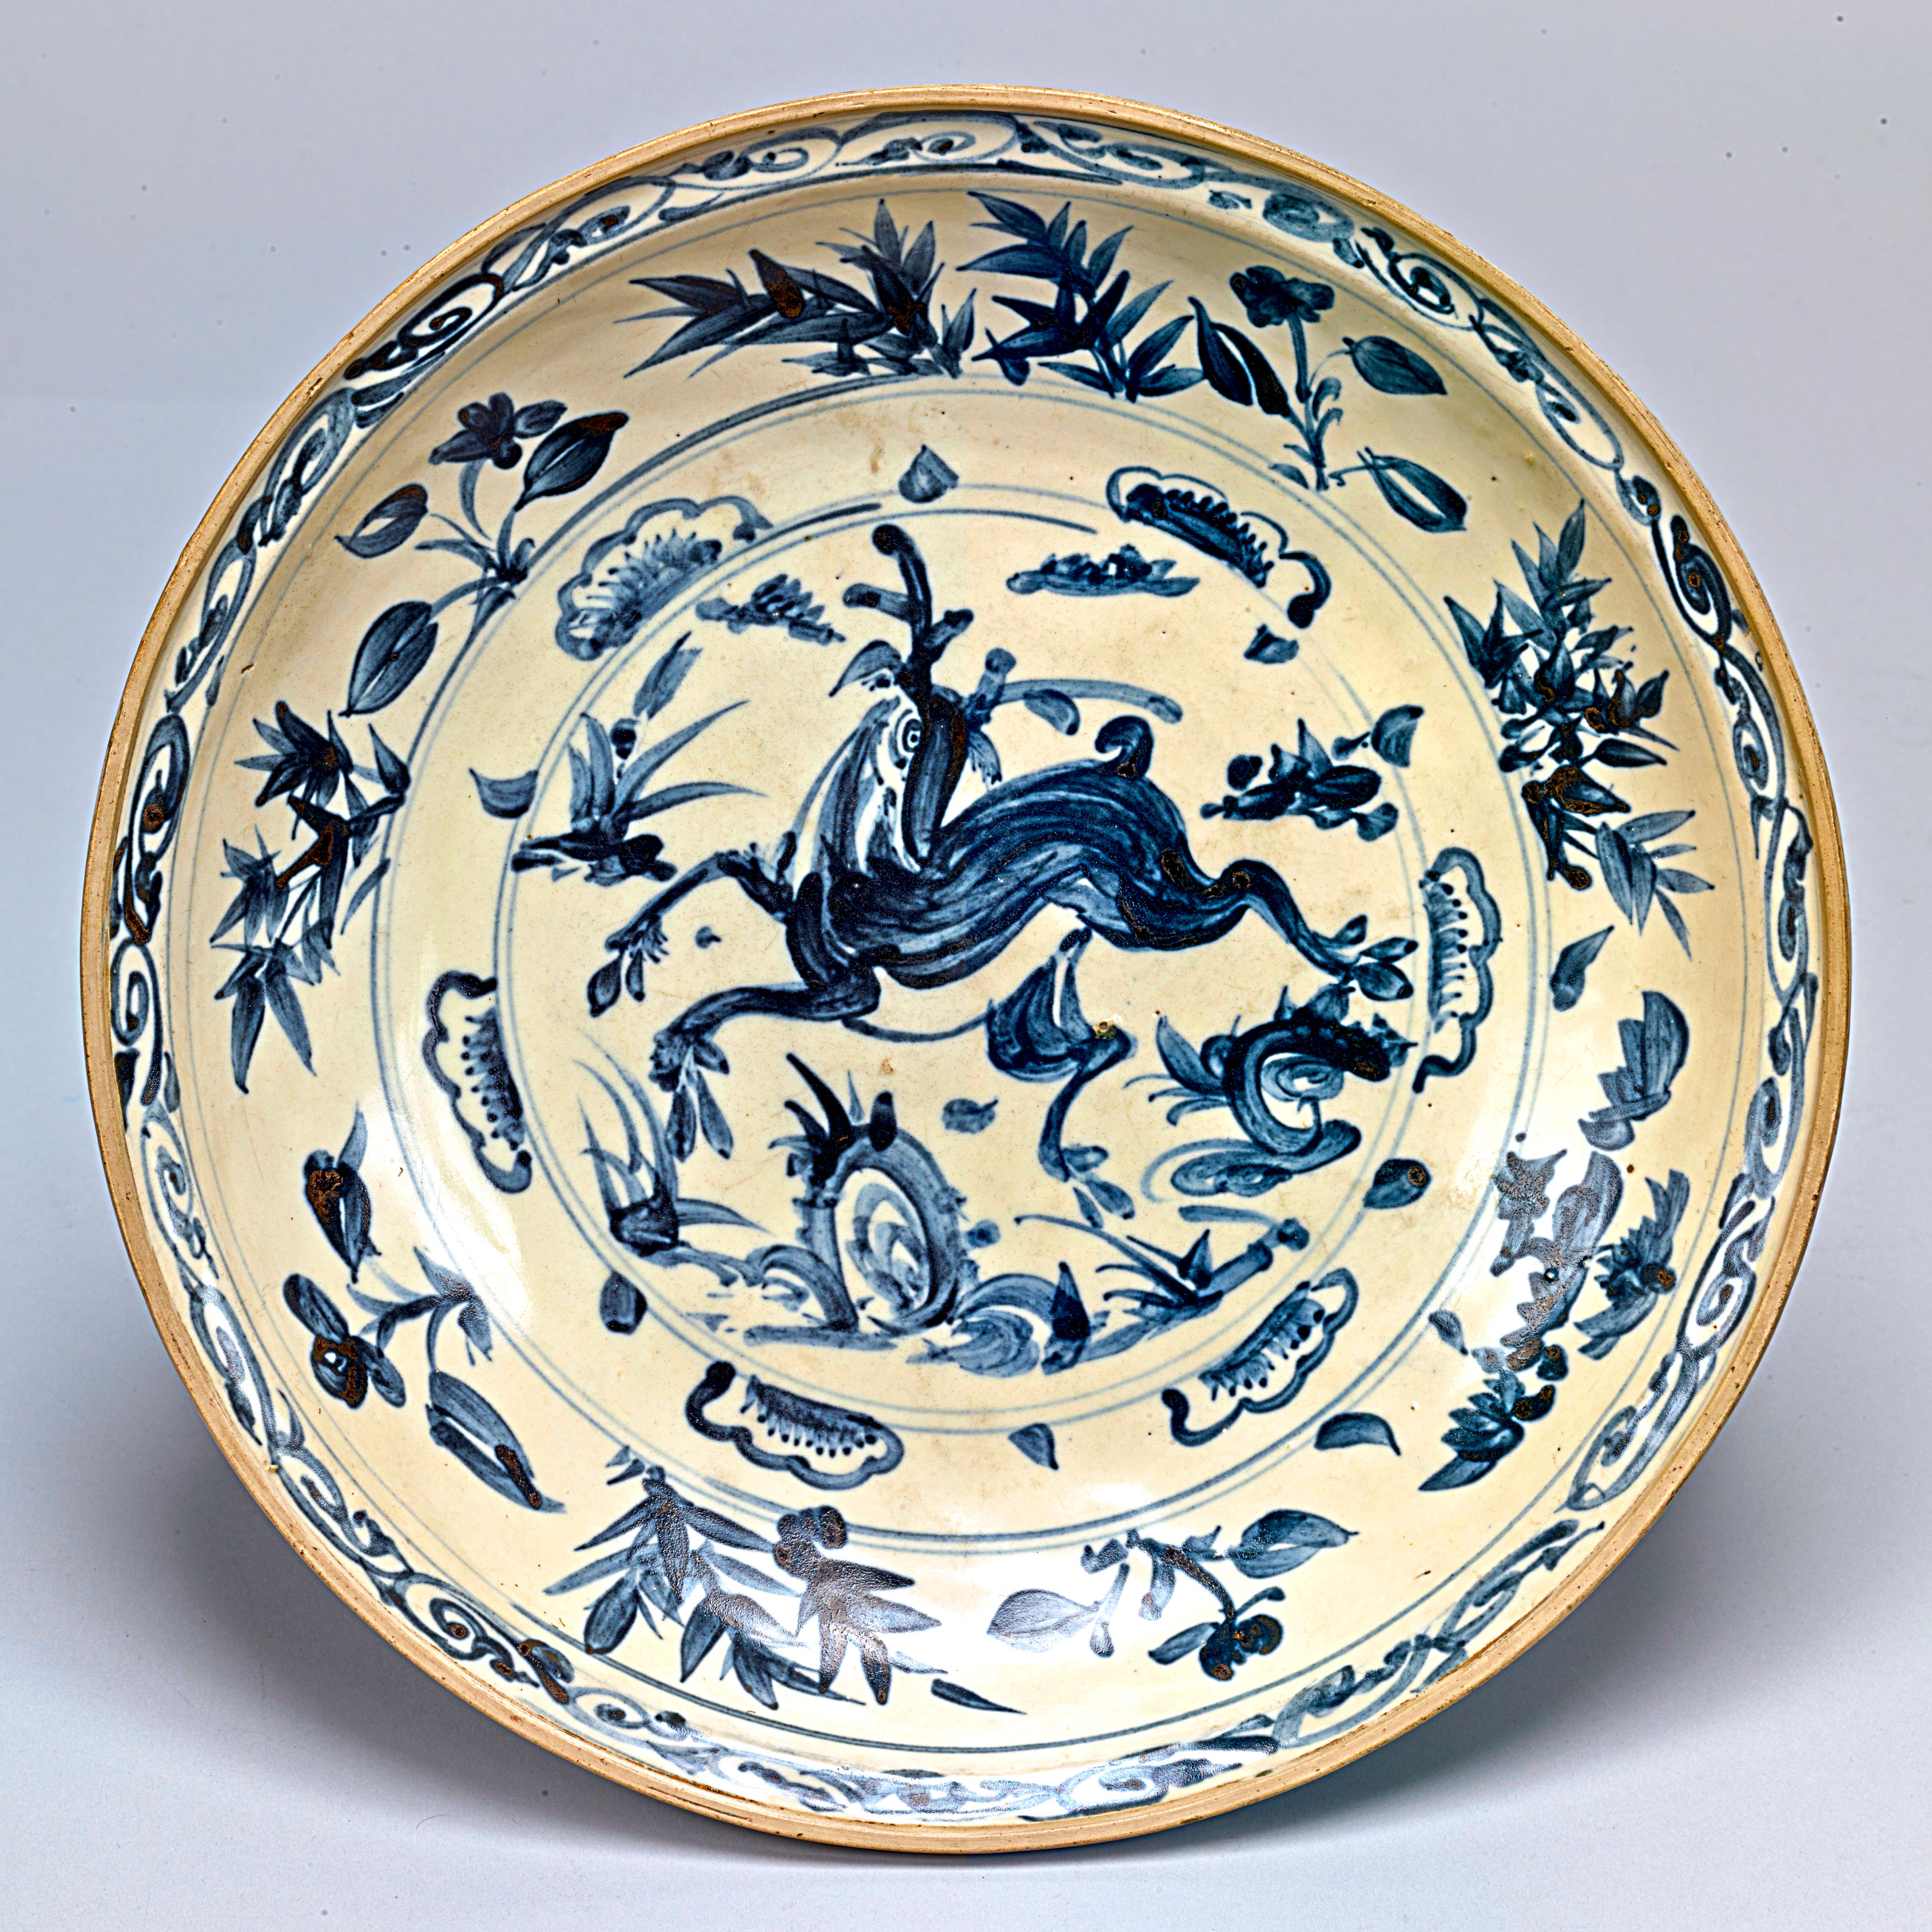 Image of "Large Dish, Deer and landscape design in underglaze blue, 15th-16th century (Important Art Object)"